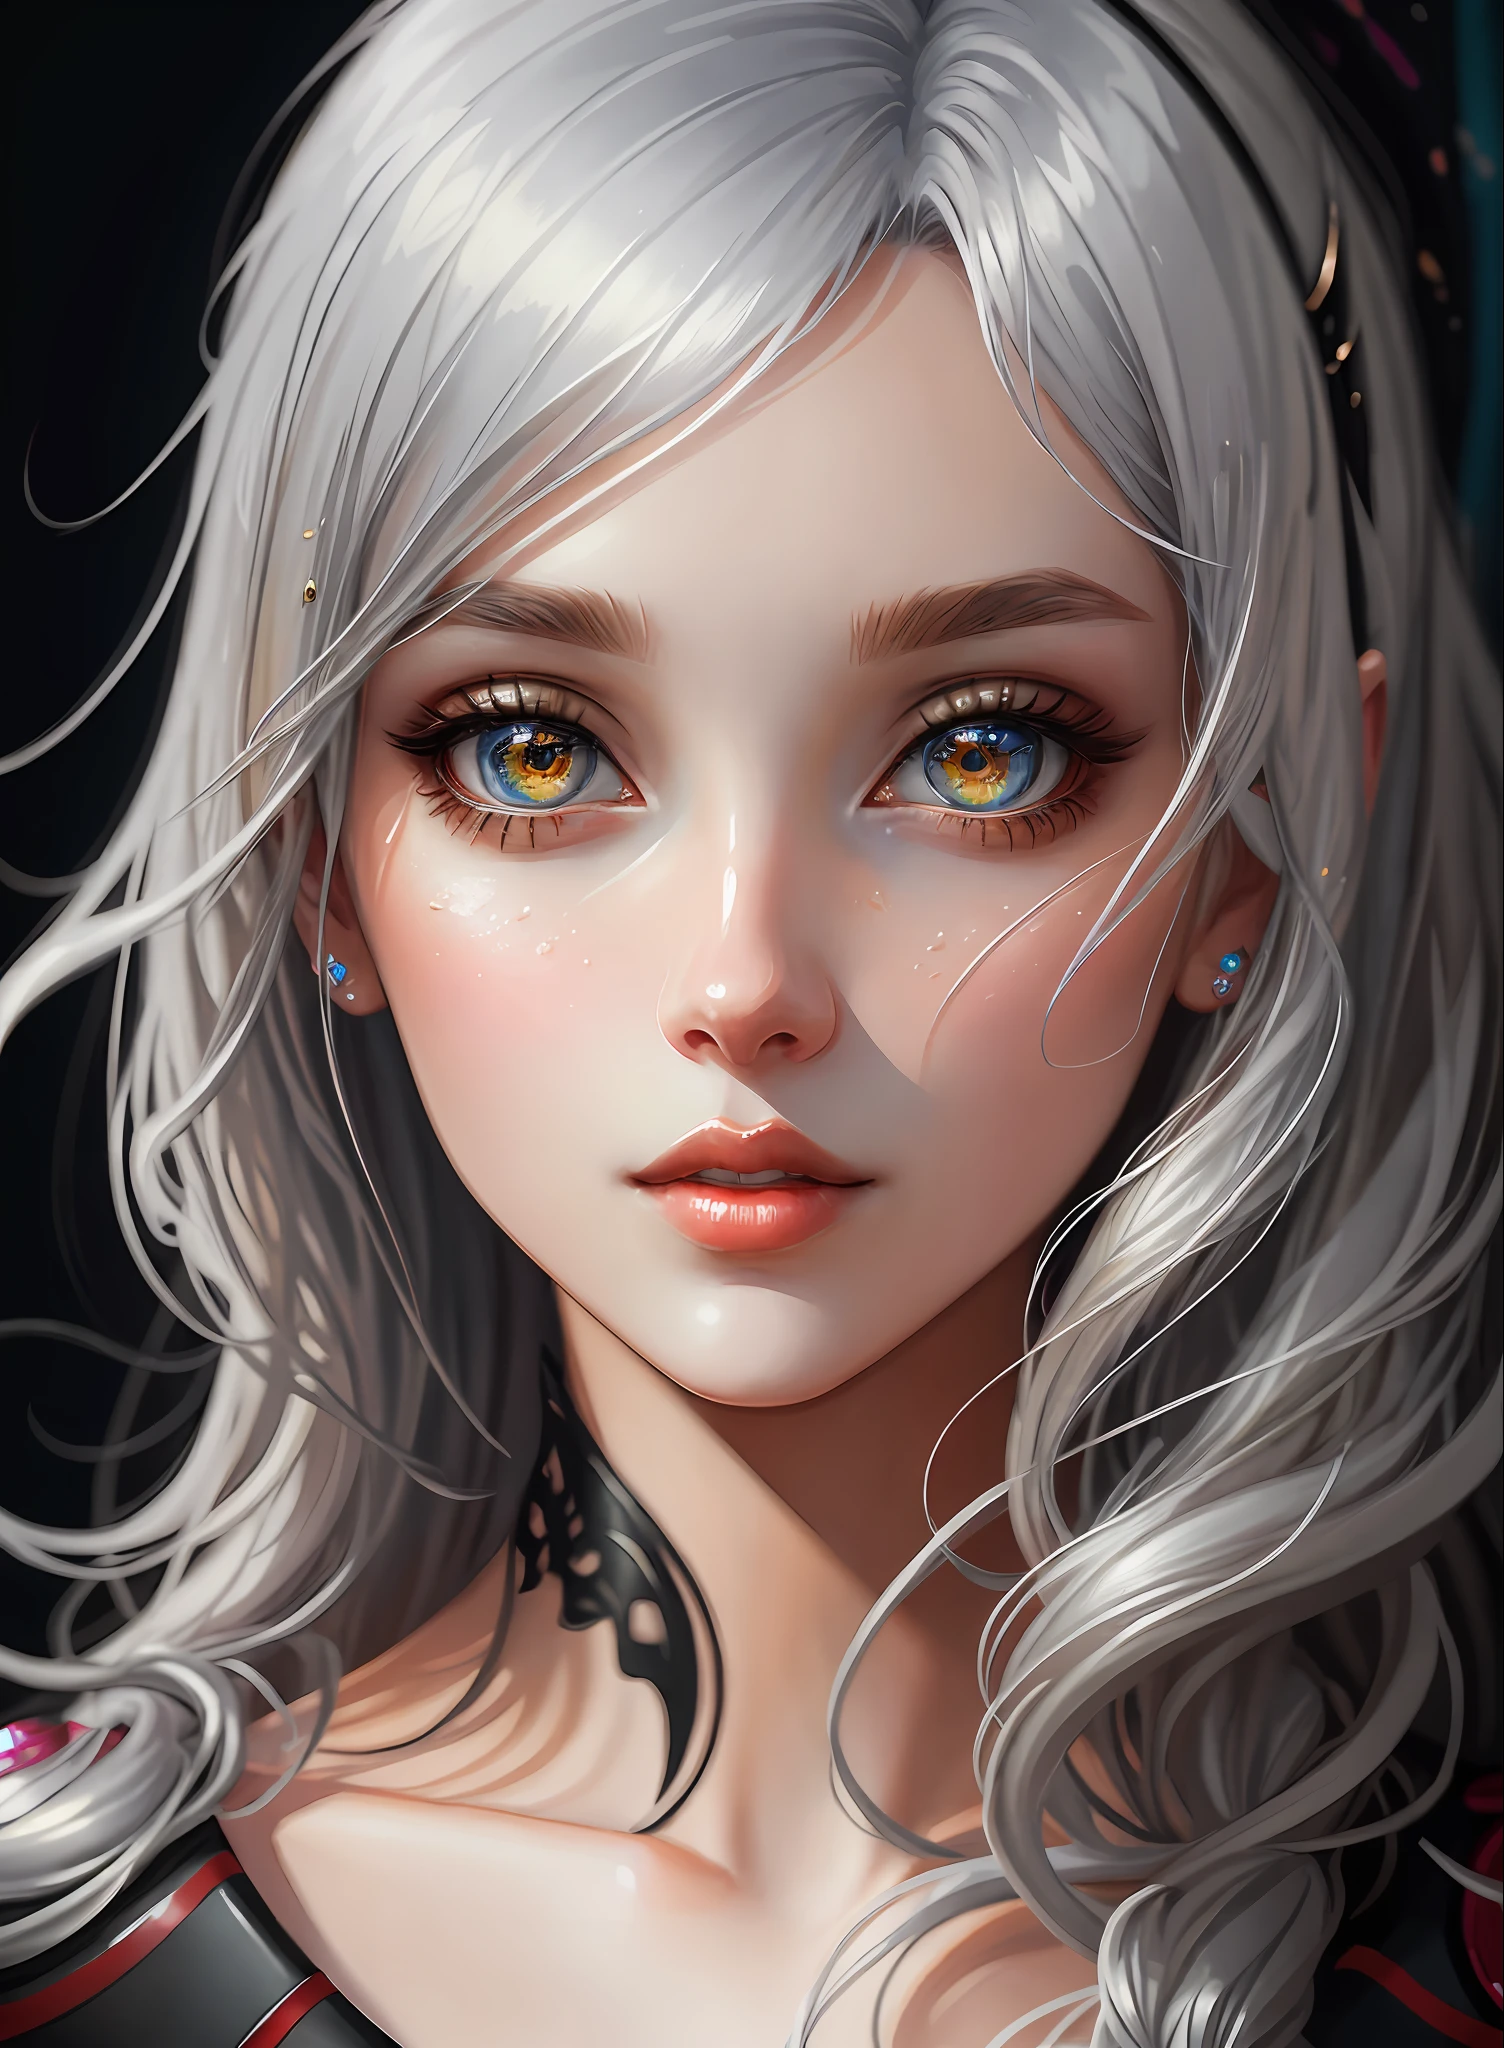 ((best qualiy)), ((The Masterpiece)), ((Realstic)), (full details),anime stile、 (a 1 woman)Close up portrait of cute woman with black hair silver hair blonde、Beautiful and moisturized eyes like crystal clear glass、Face without makeup、4K high-definition digital art、stunning digital illustration、Stunning 8K artwork、colorfull digital fantasy art、Colorful and bright、Beautiful digital artwork、Colorful Digital Painting、digital anime art、Portrait of beautiful and pretty woman、8K HD Digital Wallpaper Art、digitally painting